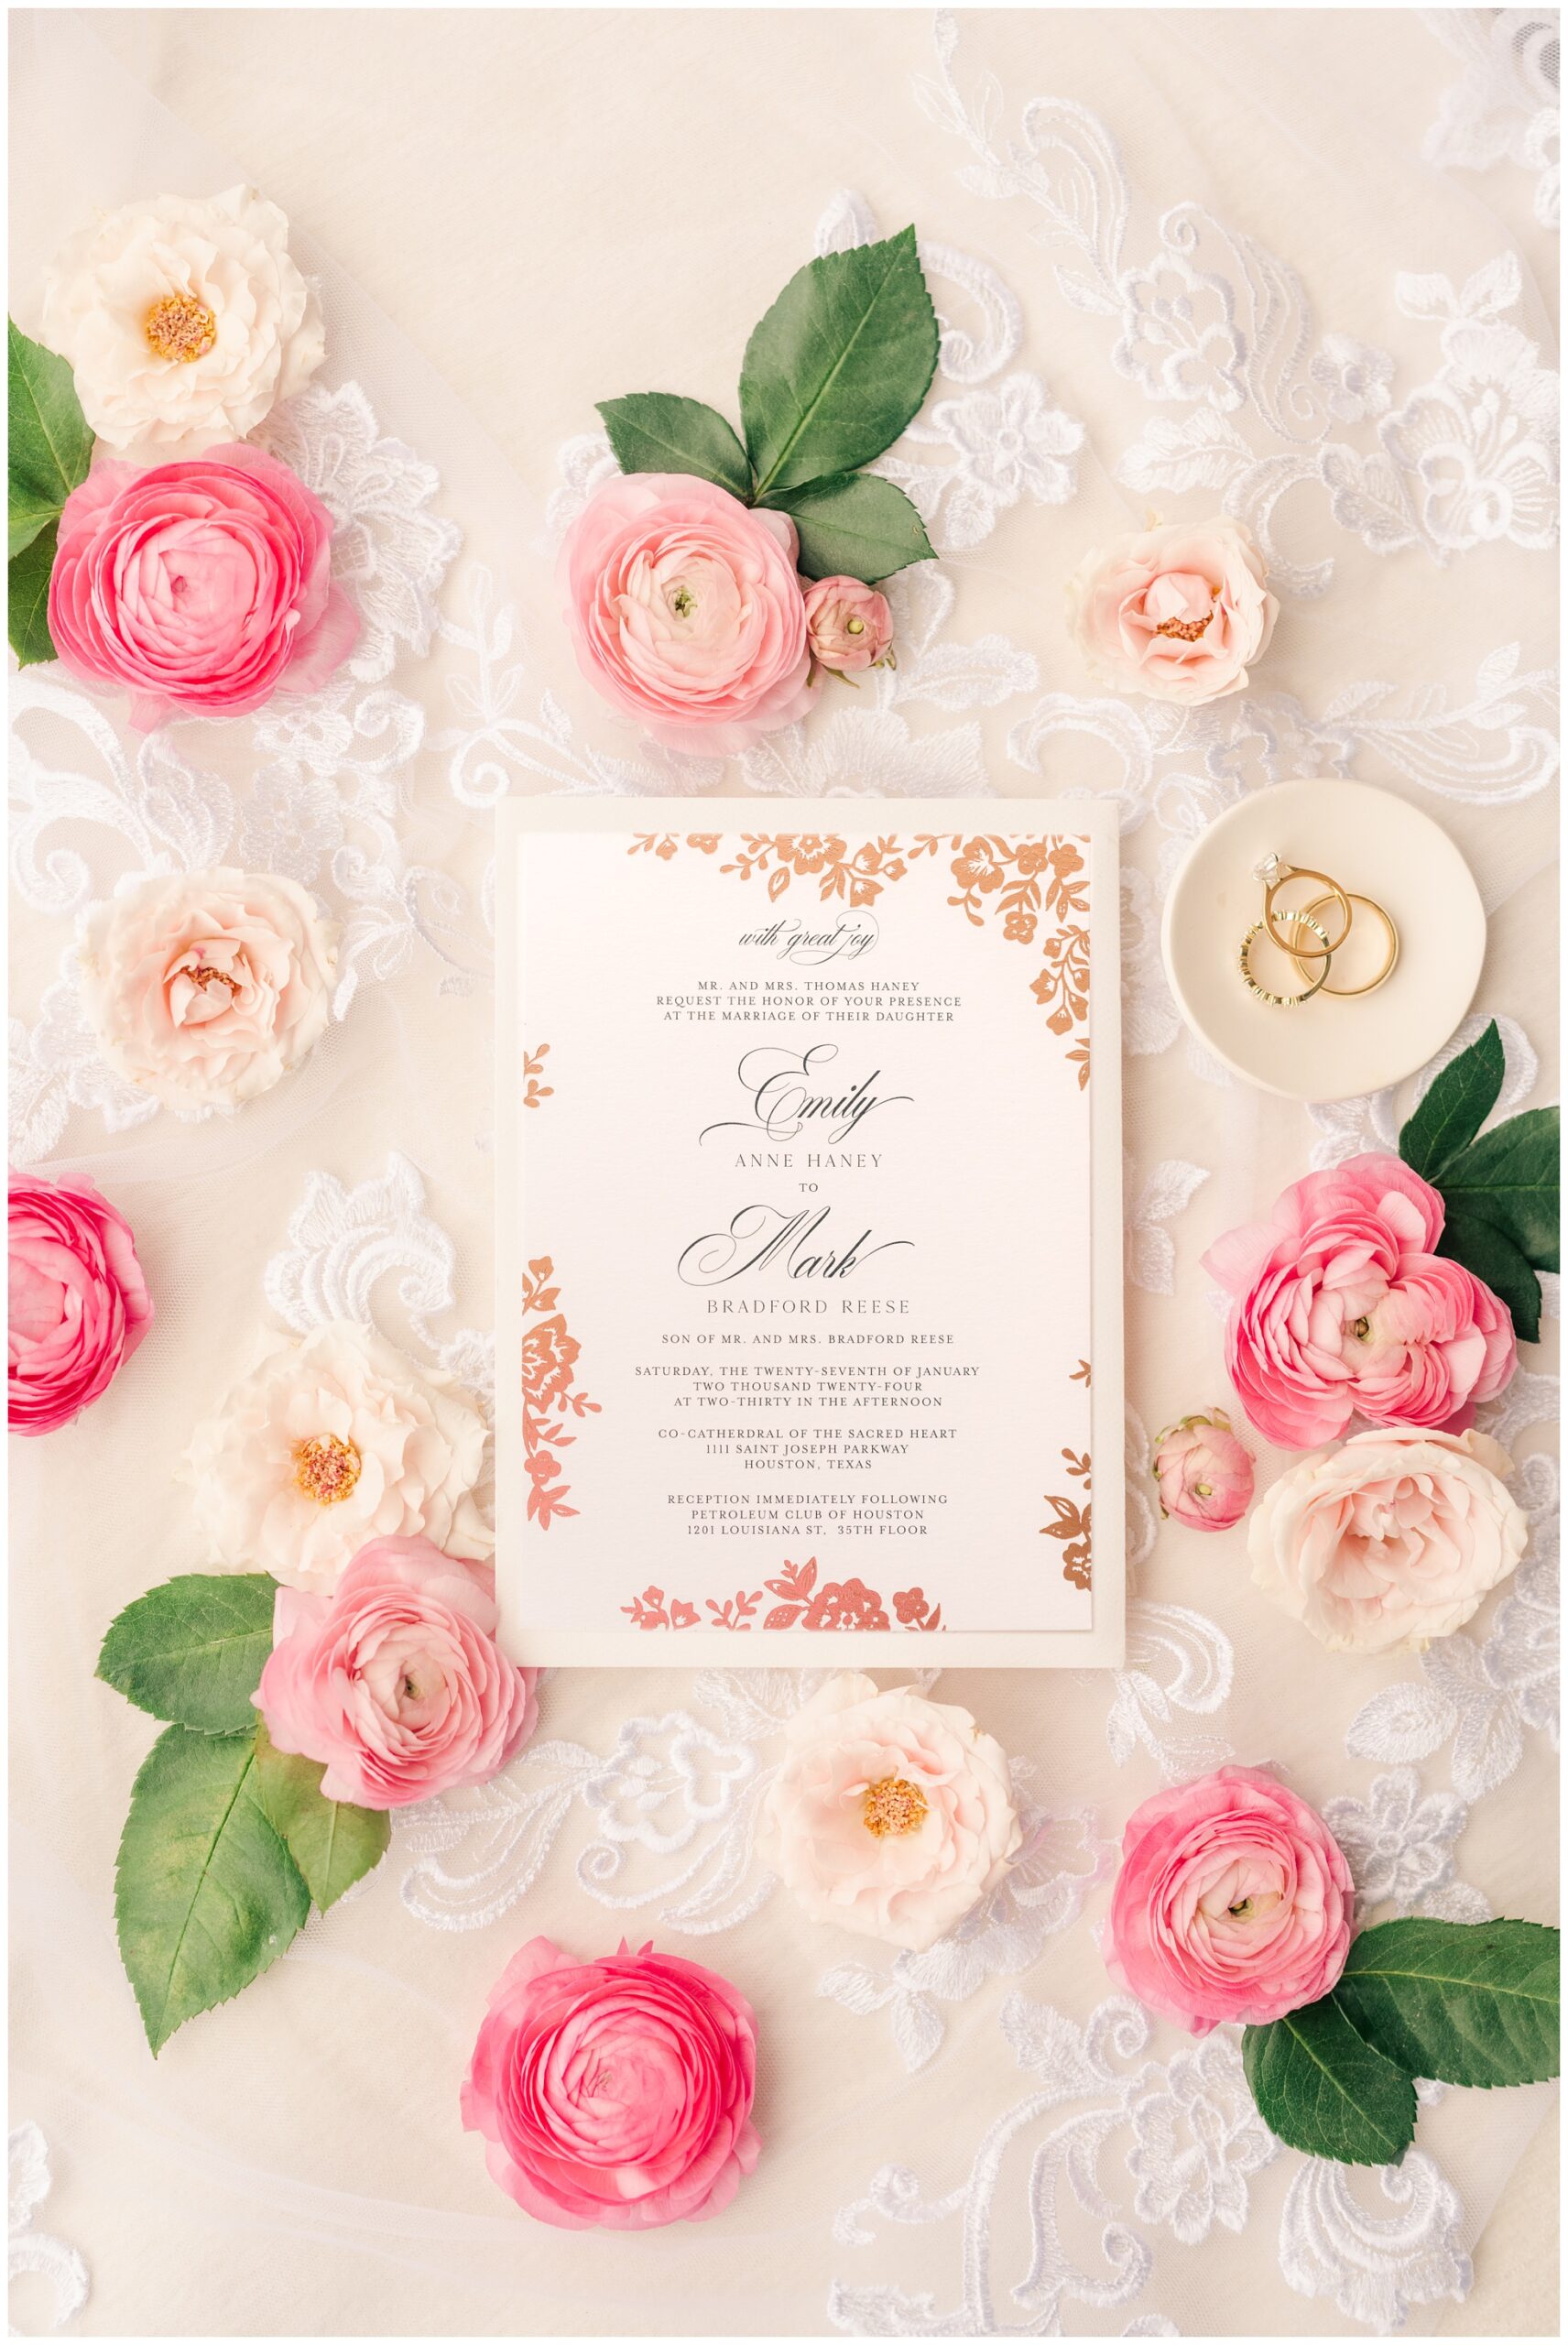 wedding invitiation flatlay with pink flowers on lace.